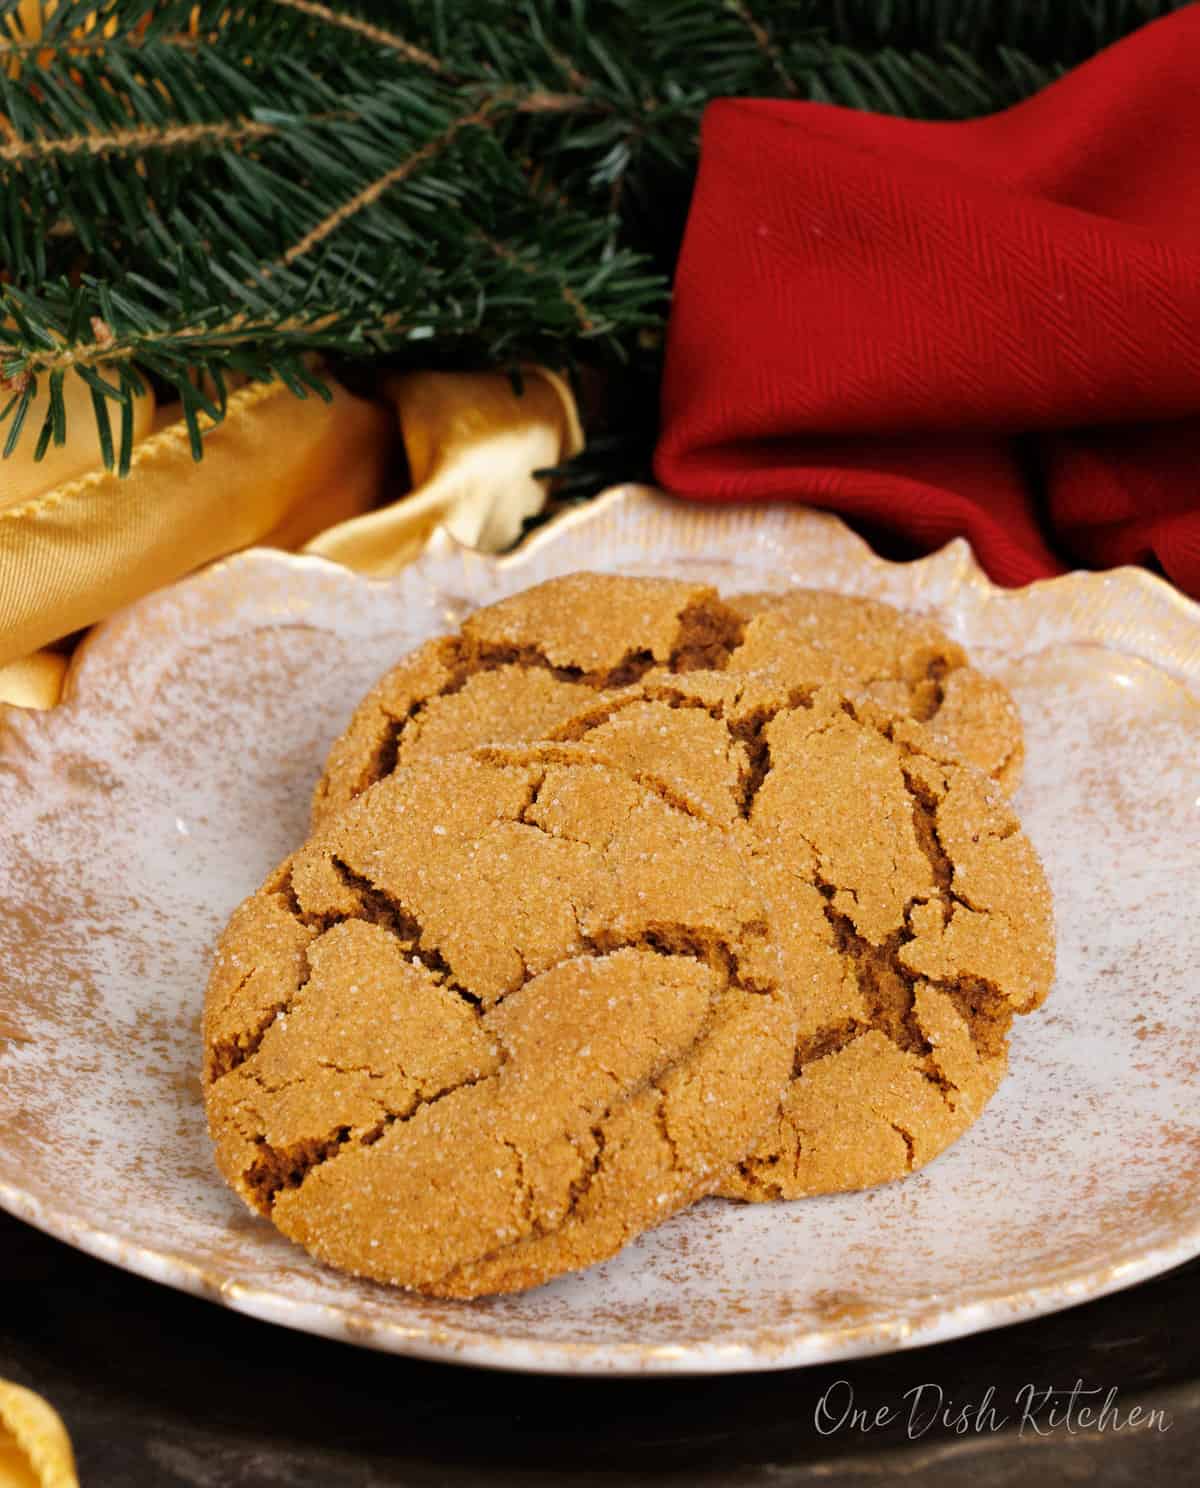 three molasses cookies on a white plate next to Christmas greenery and a red napkin on a silver tray